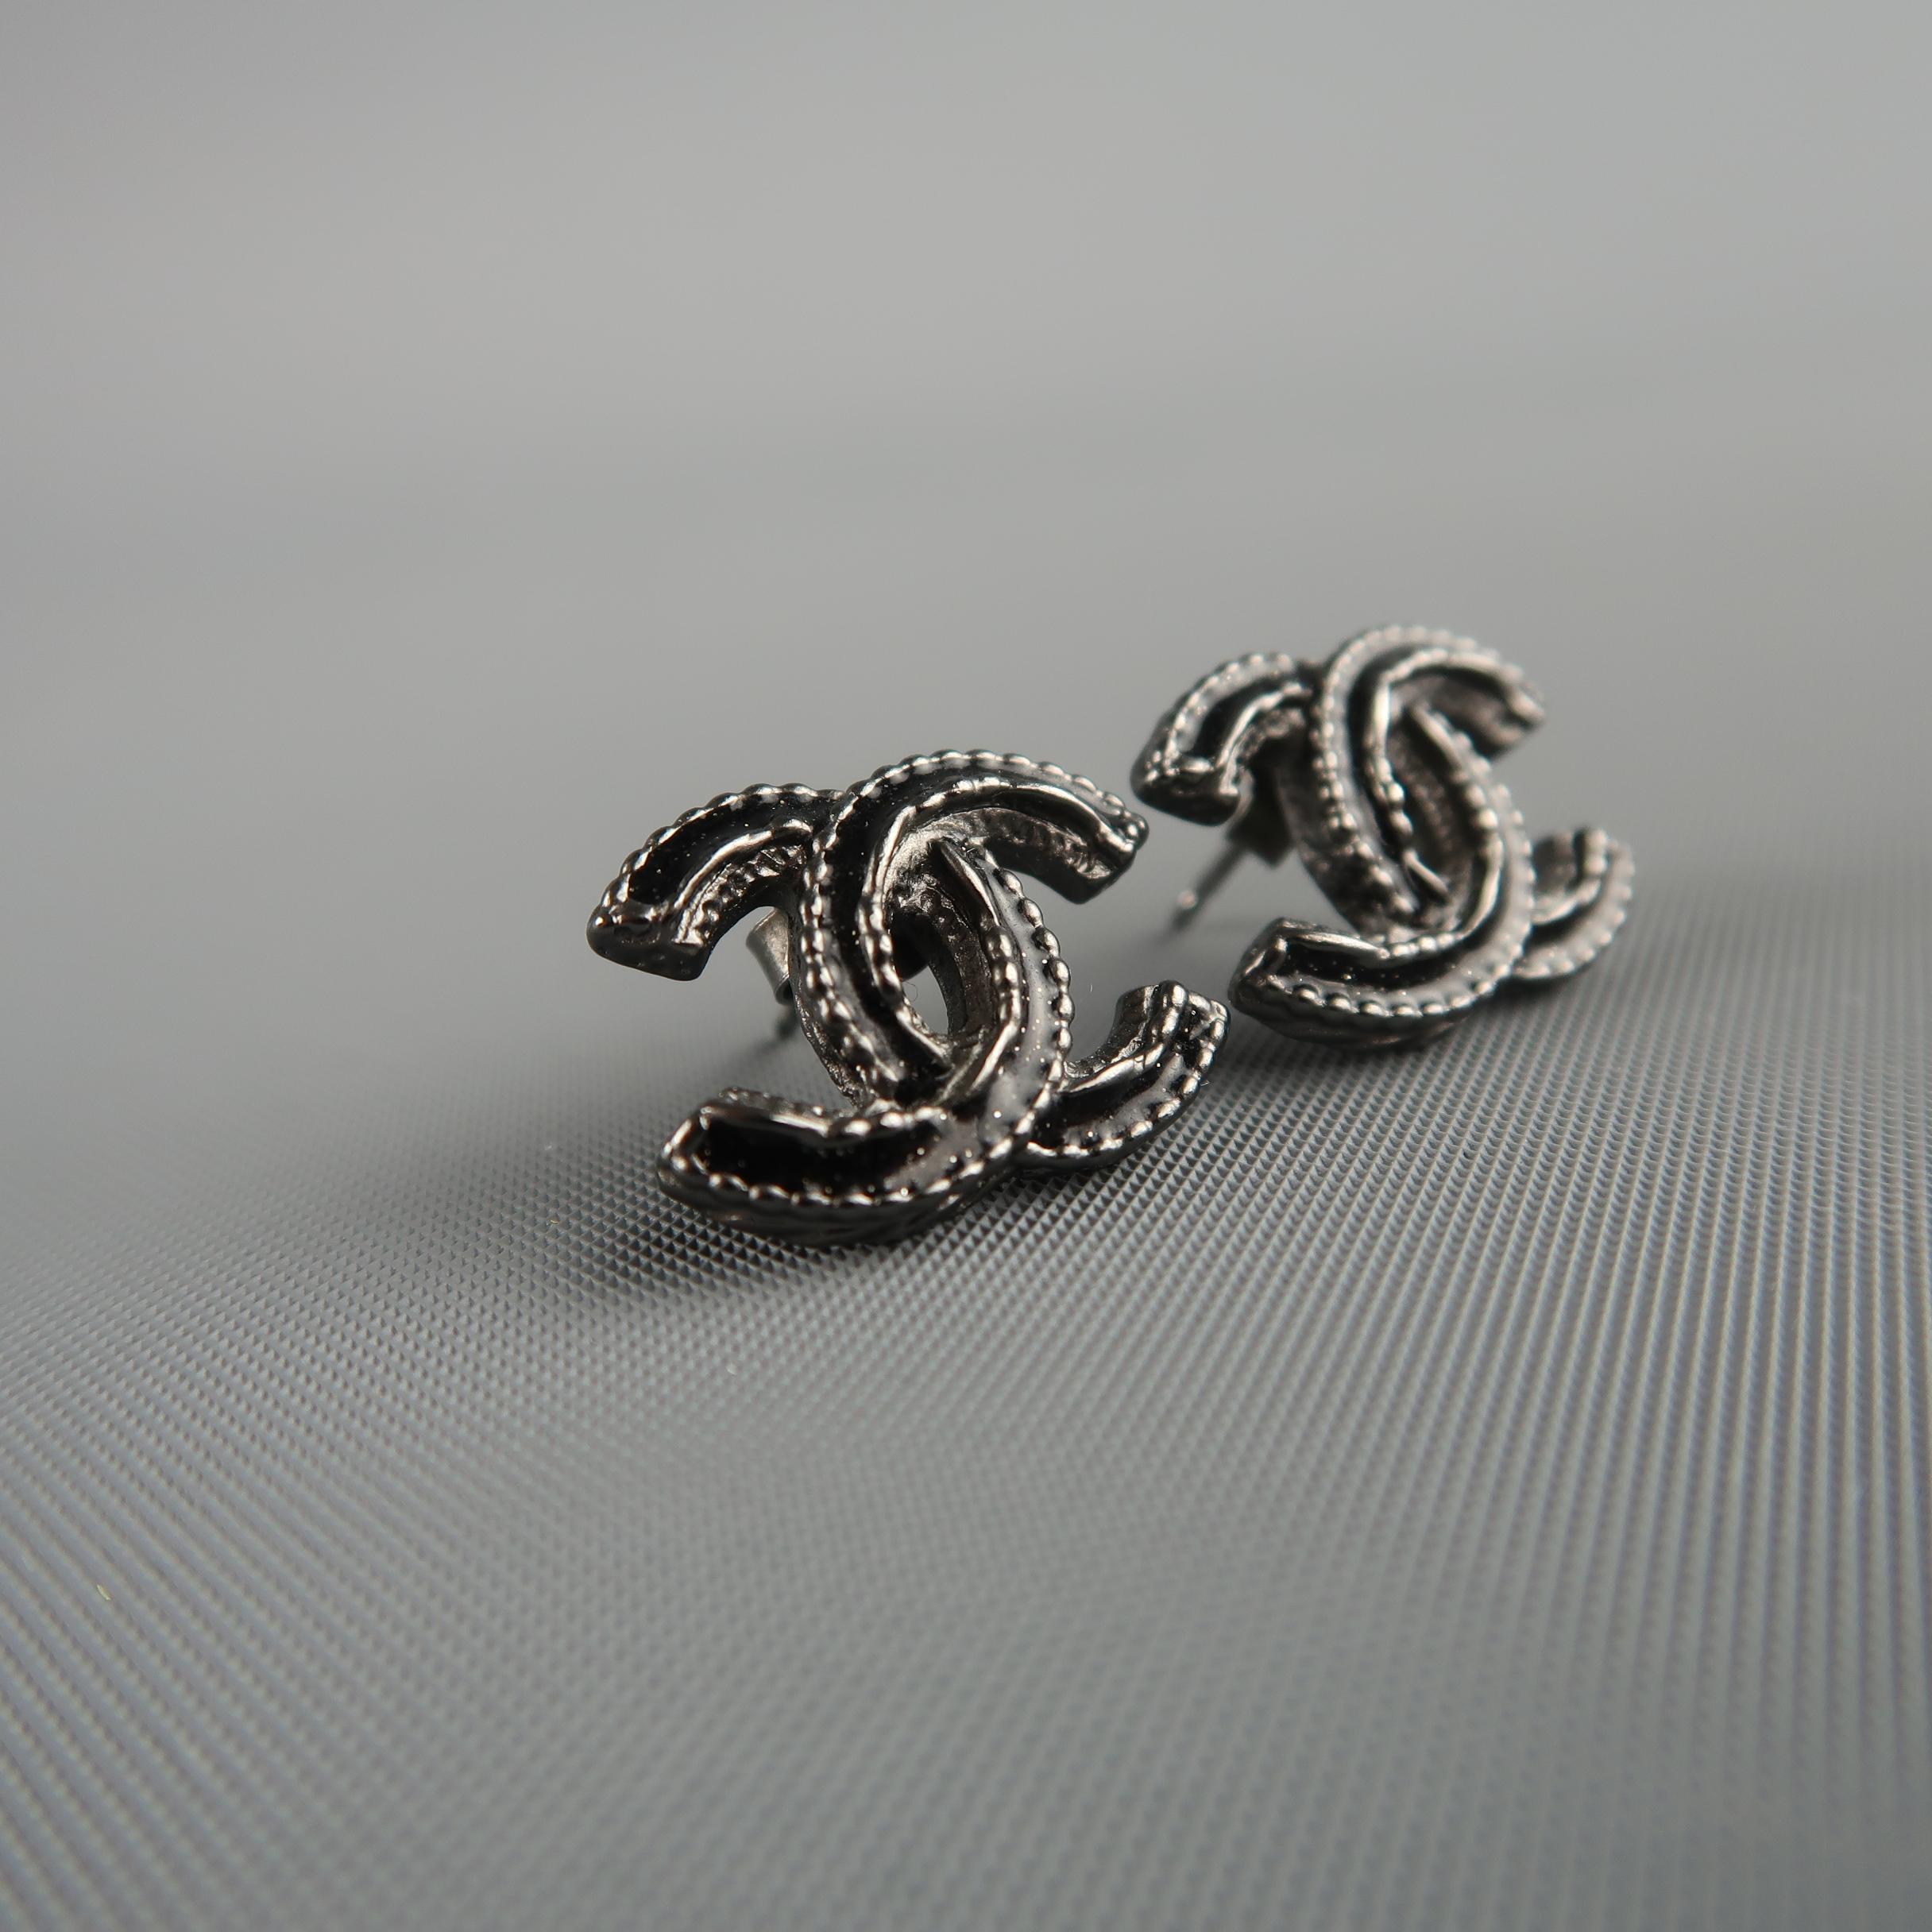 CHANEL Fall / Winter 2012 earrings come in gunmetal with black glitter enamel CC logos and post backs. With dust bag. Made in France.
 
Excellent Pre-Owned Condition.
Marked: AW12
 
1.75 x 1.5 cm.